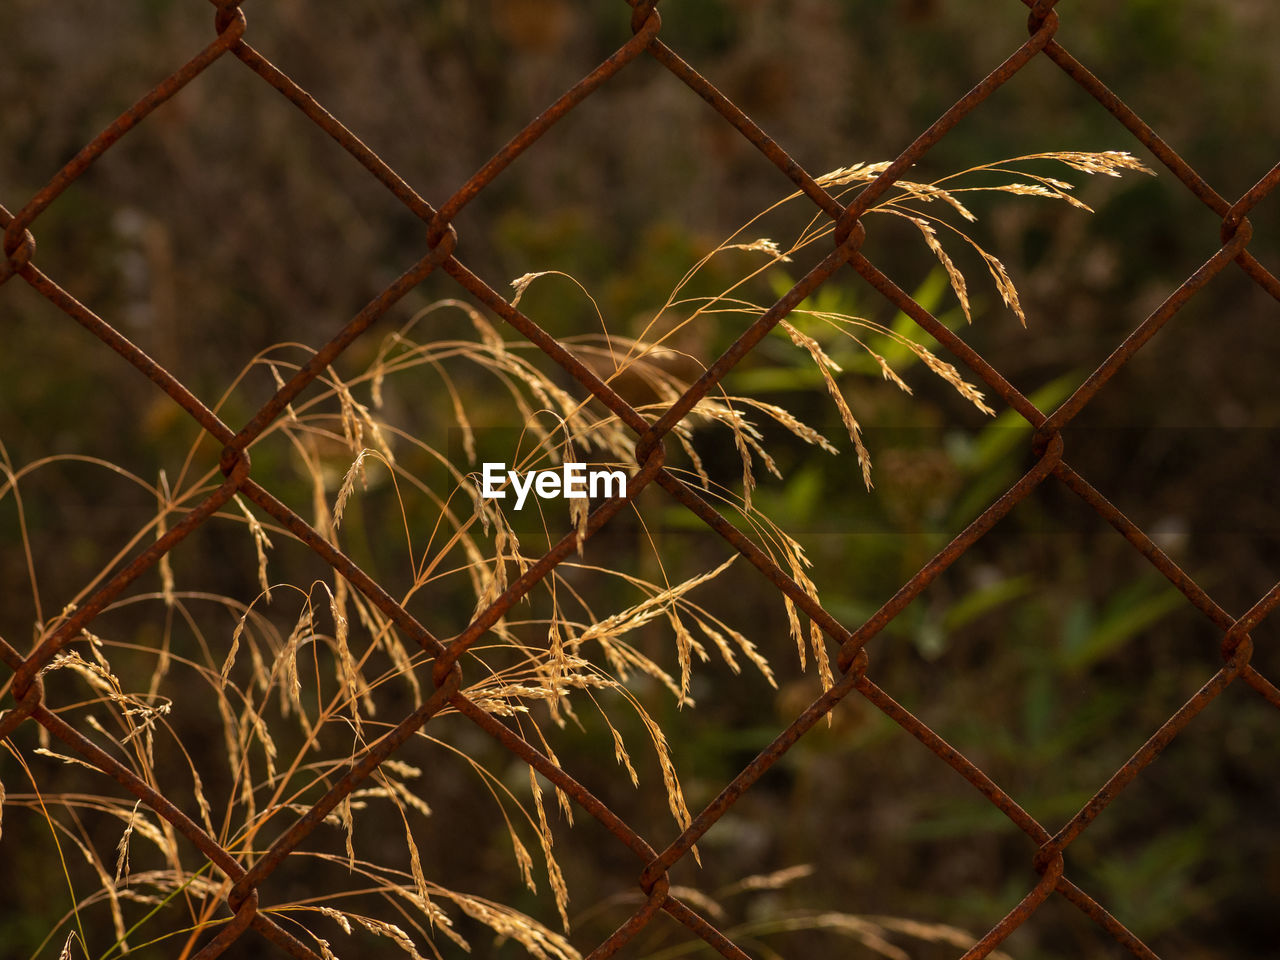 Close-up of chainlink fence by plant